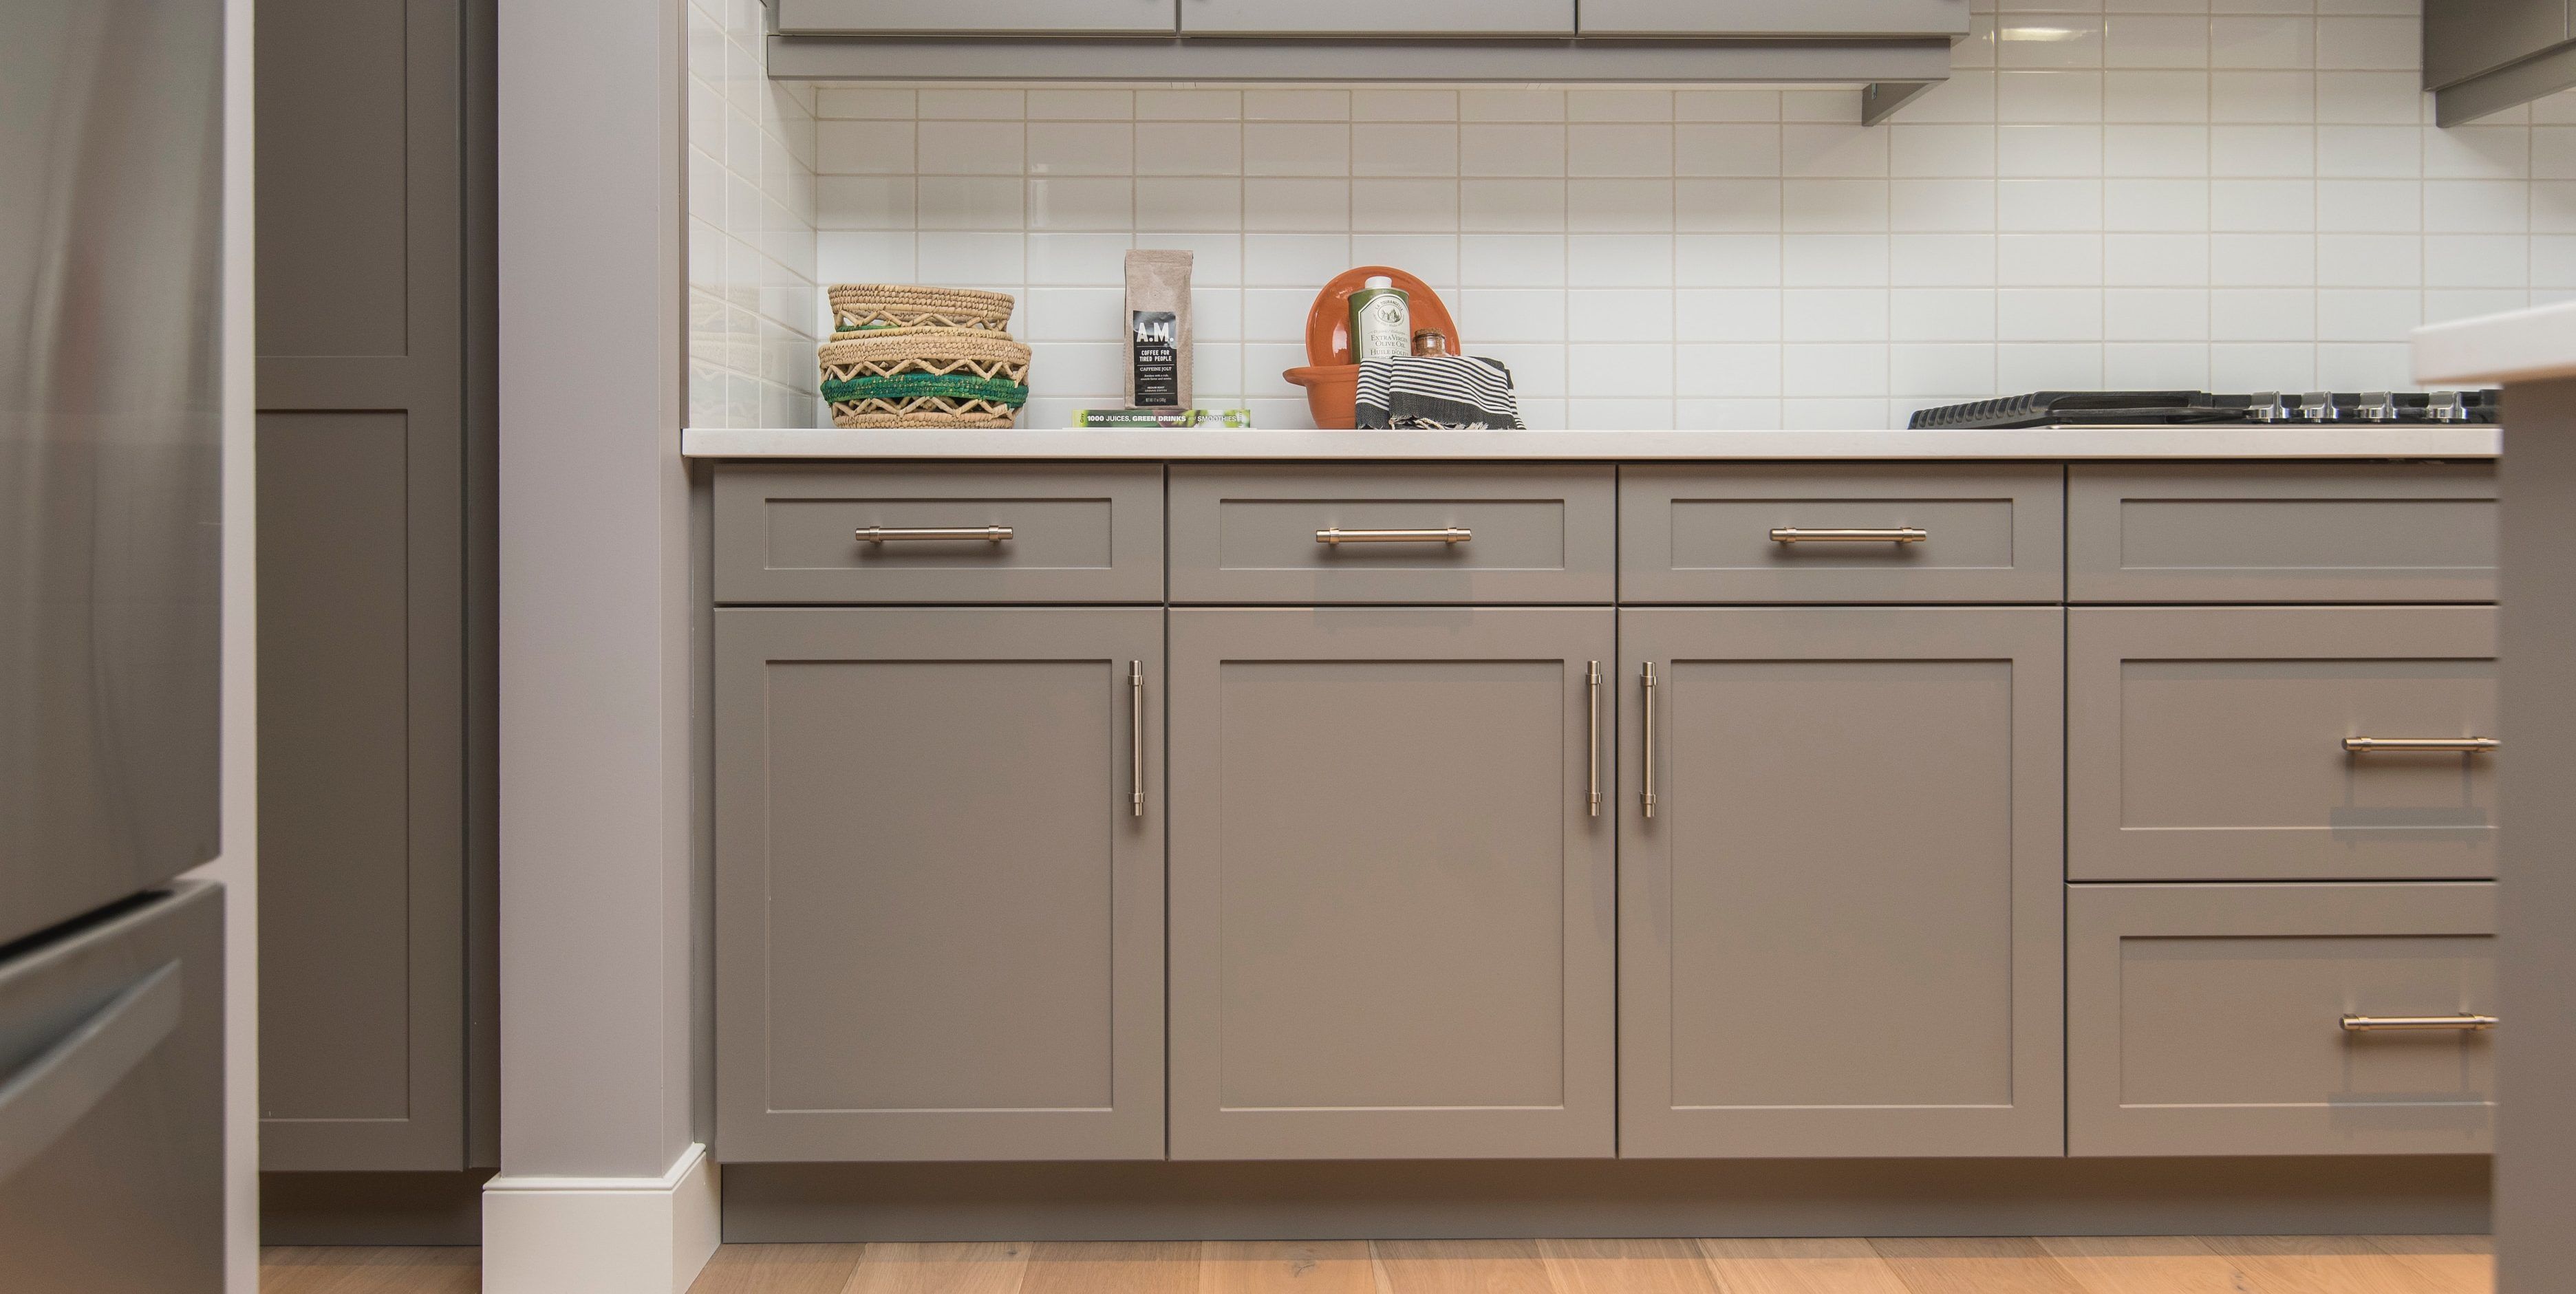 The best tips on restoring old cabinets | ReviewThis